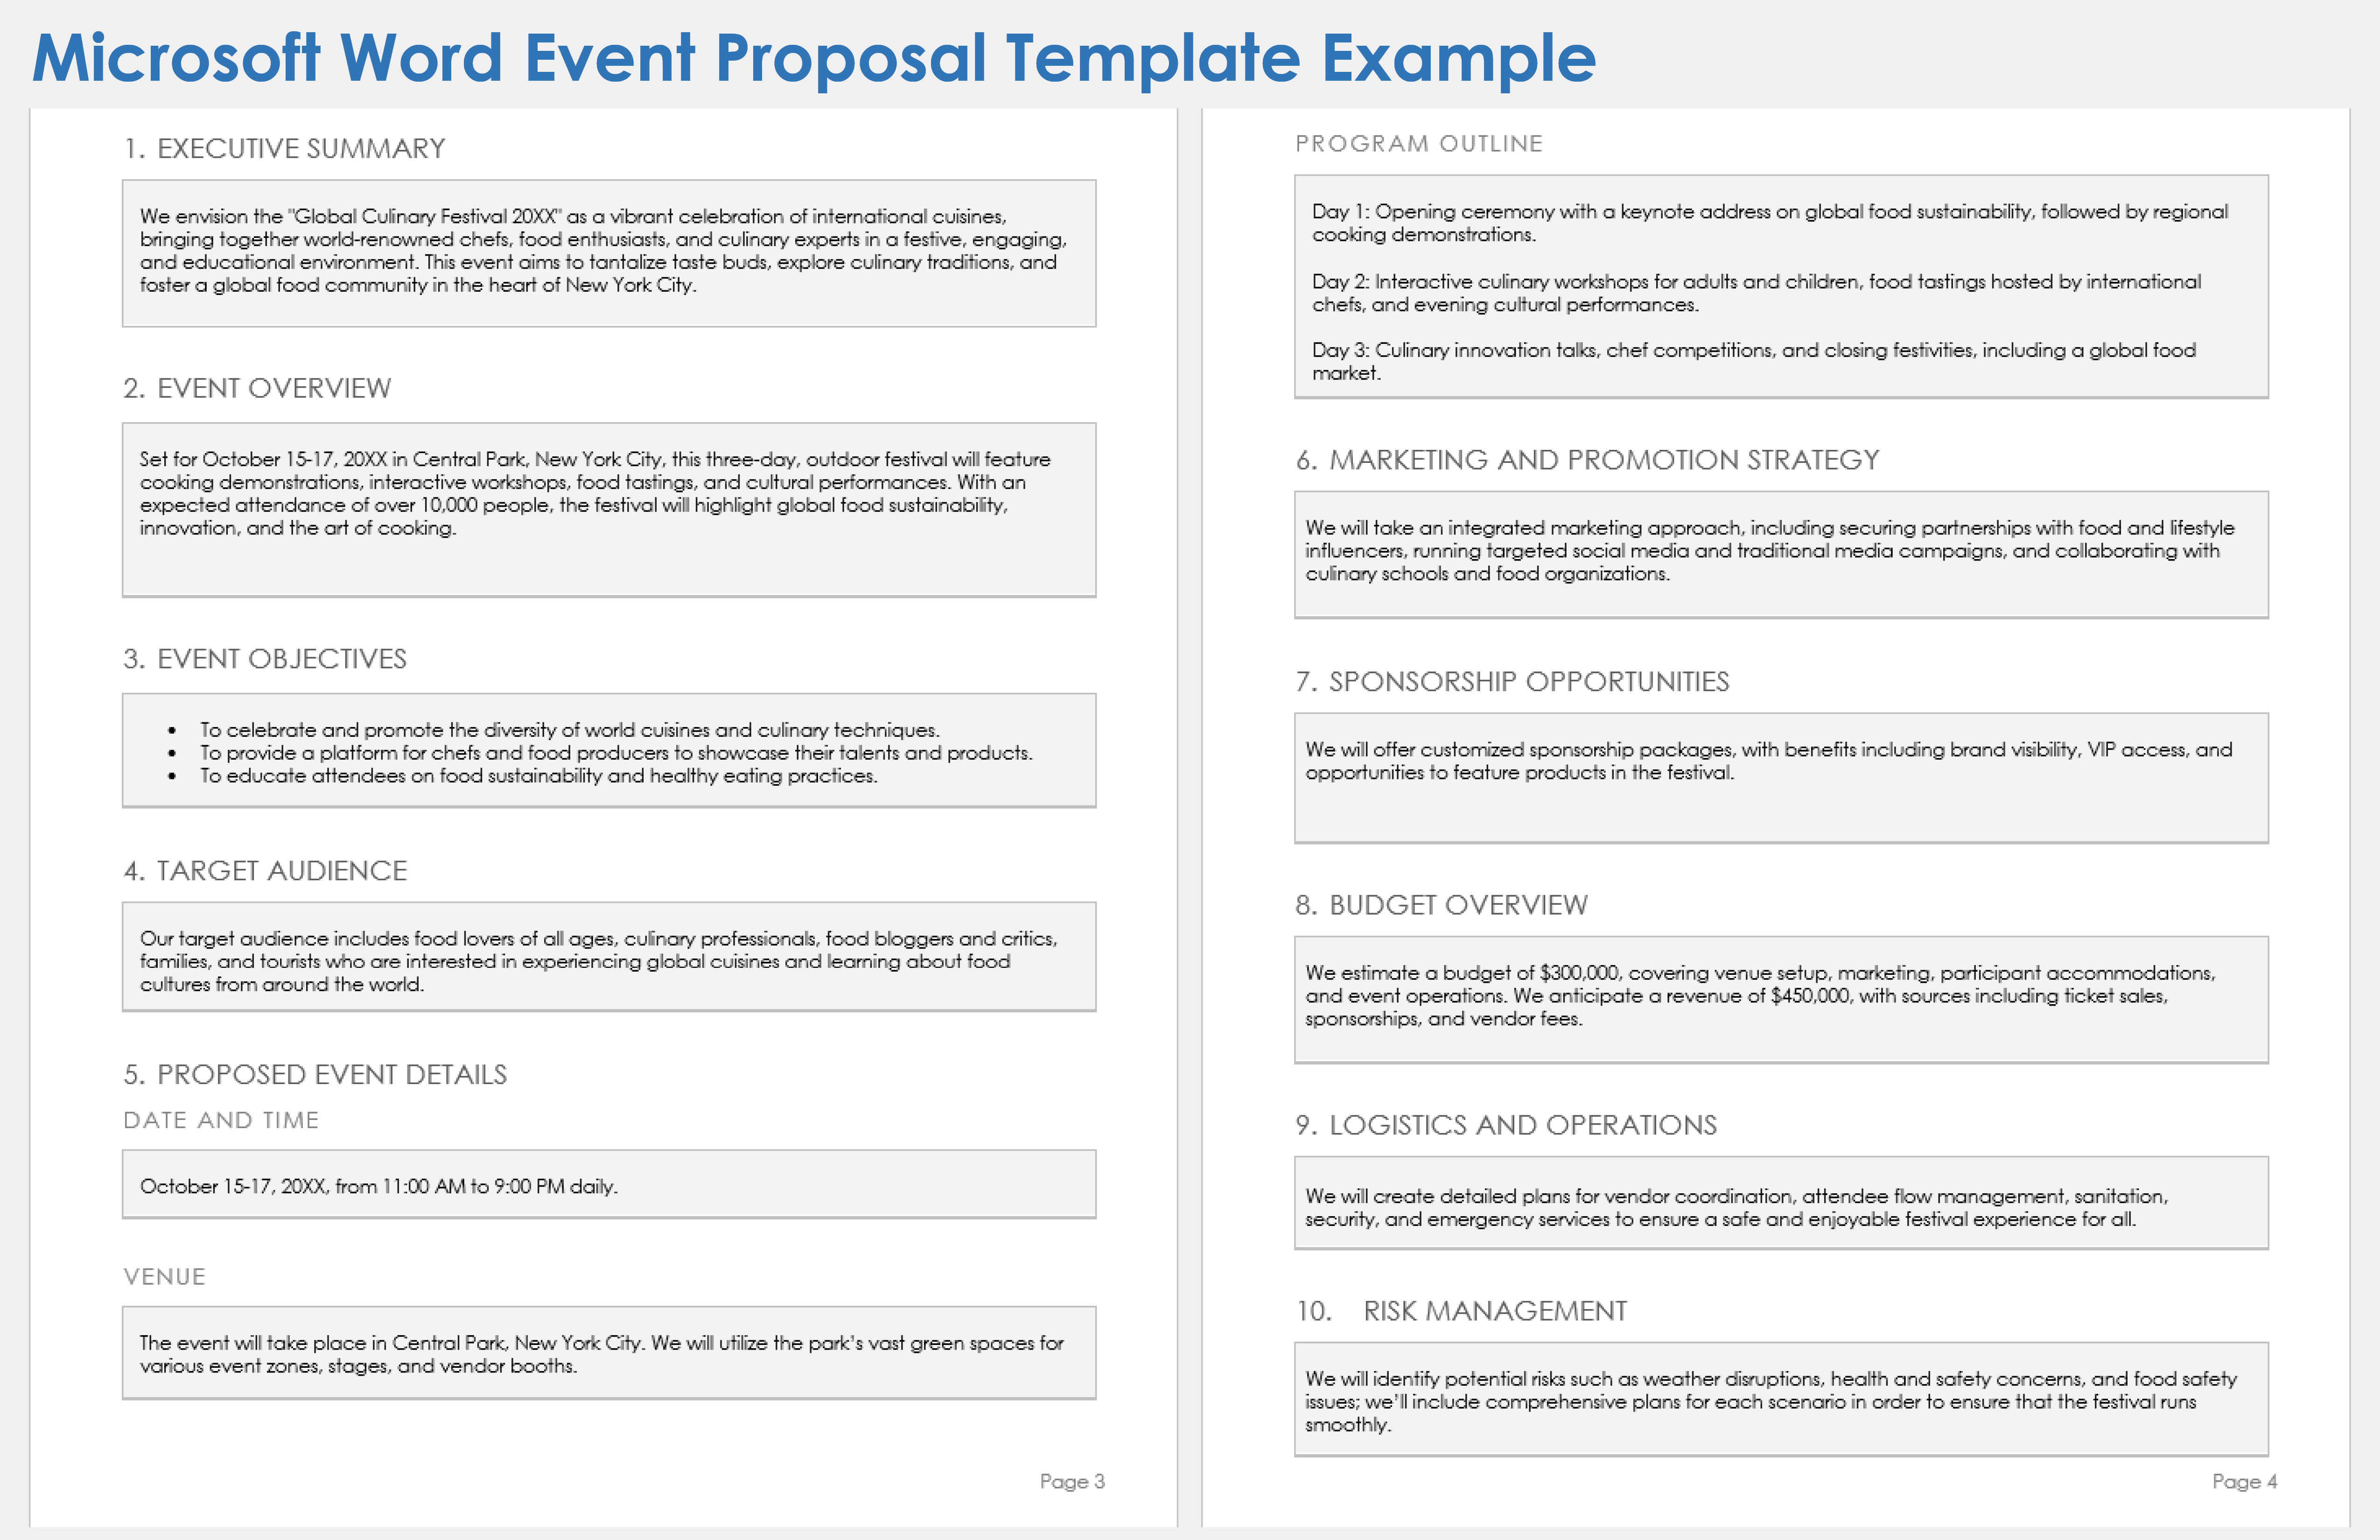 Microsoft Word Event Proposal Template Example